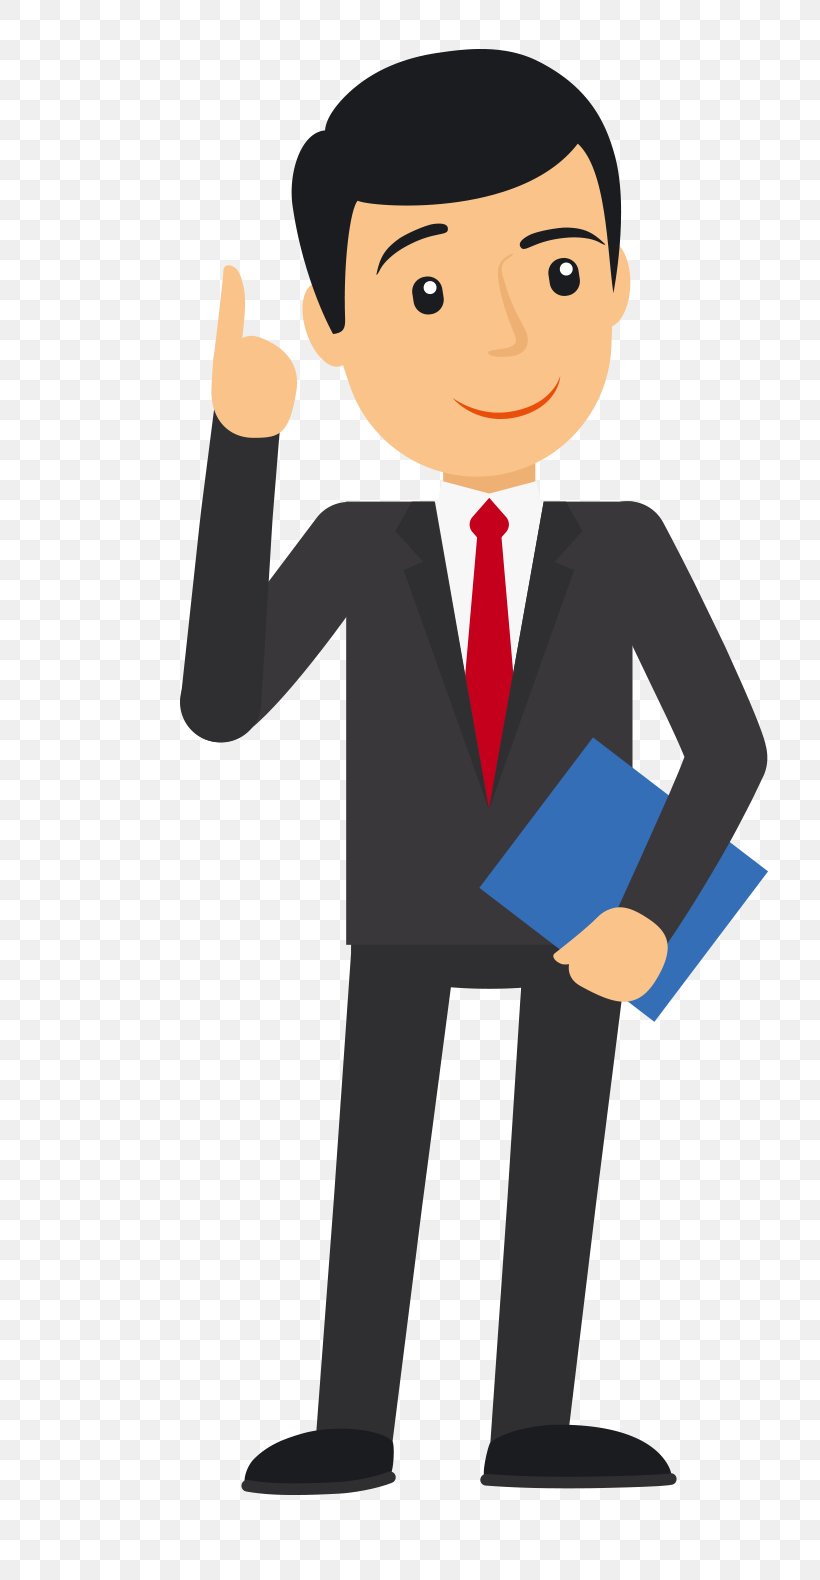 Businessperson Diagram Illustration, PNG, 805x1580px, Businessperson, Boy, Business, Cartoon, Chart Download Free